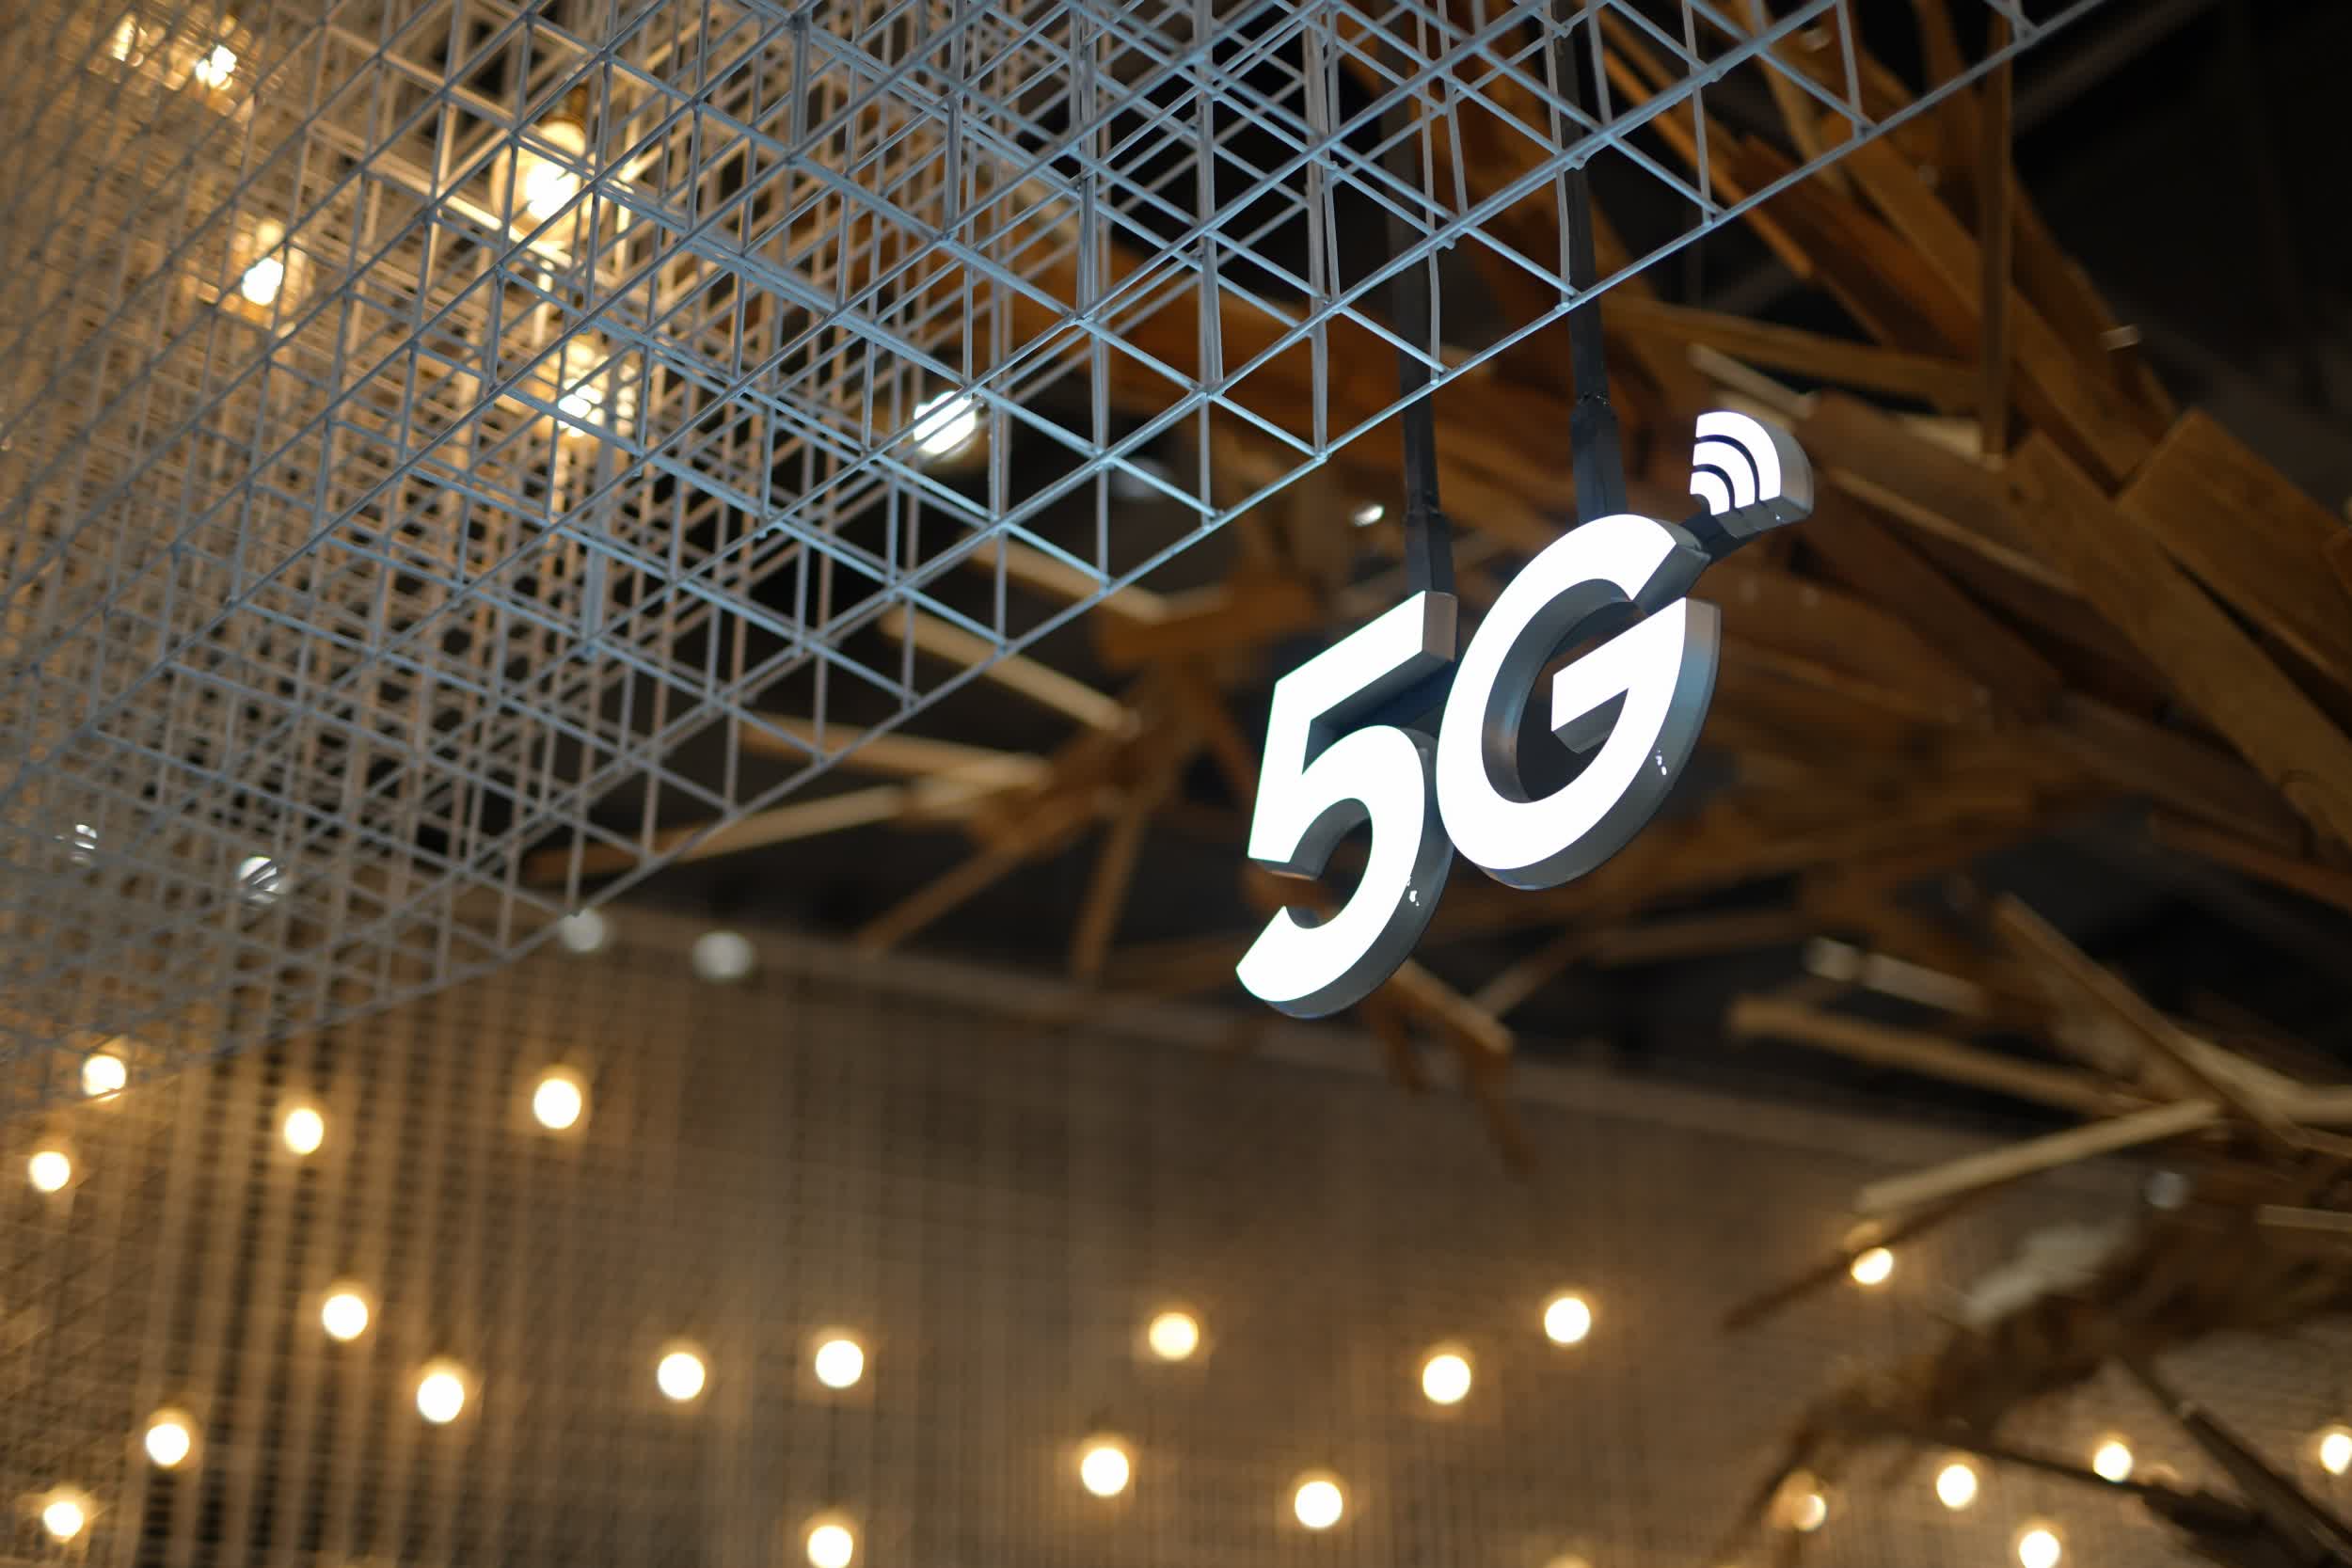 5G subscriptions to top 1 billion by the end of 2022